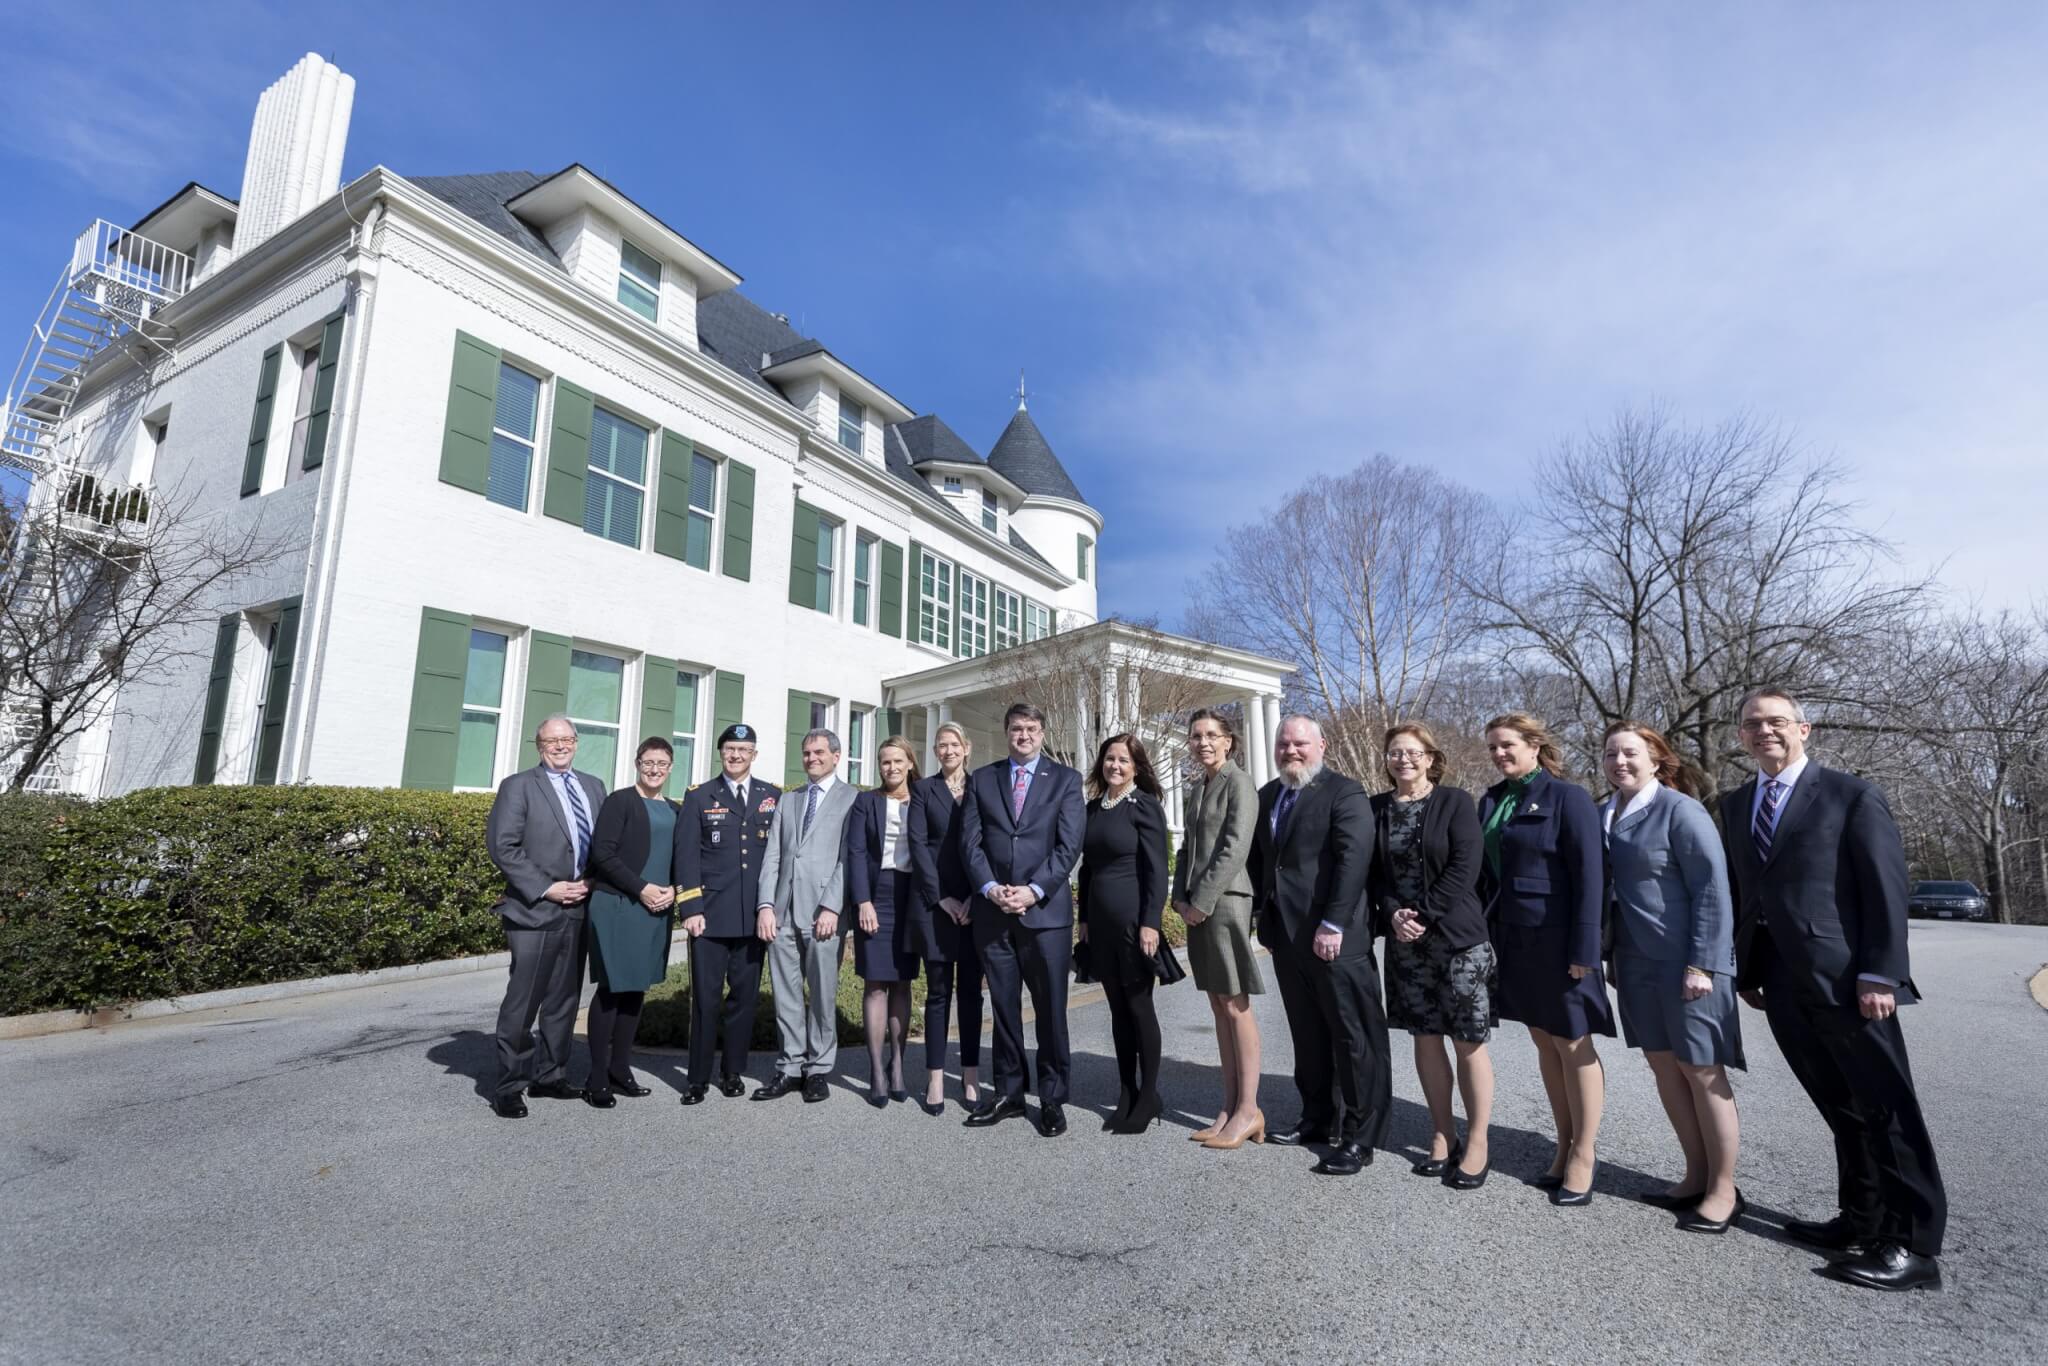 Mrs. Pence hosted key leaders of the PREVENTS public health campaign at the Vice President’s Residence. Photo by Amy Rossetti.